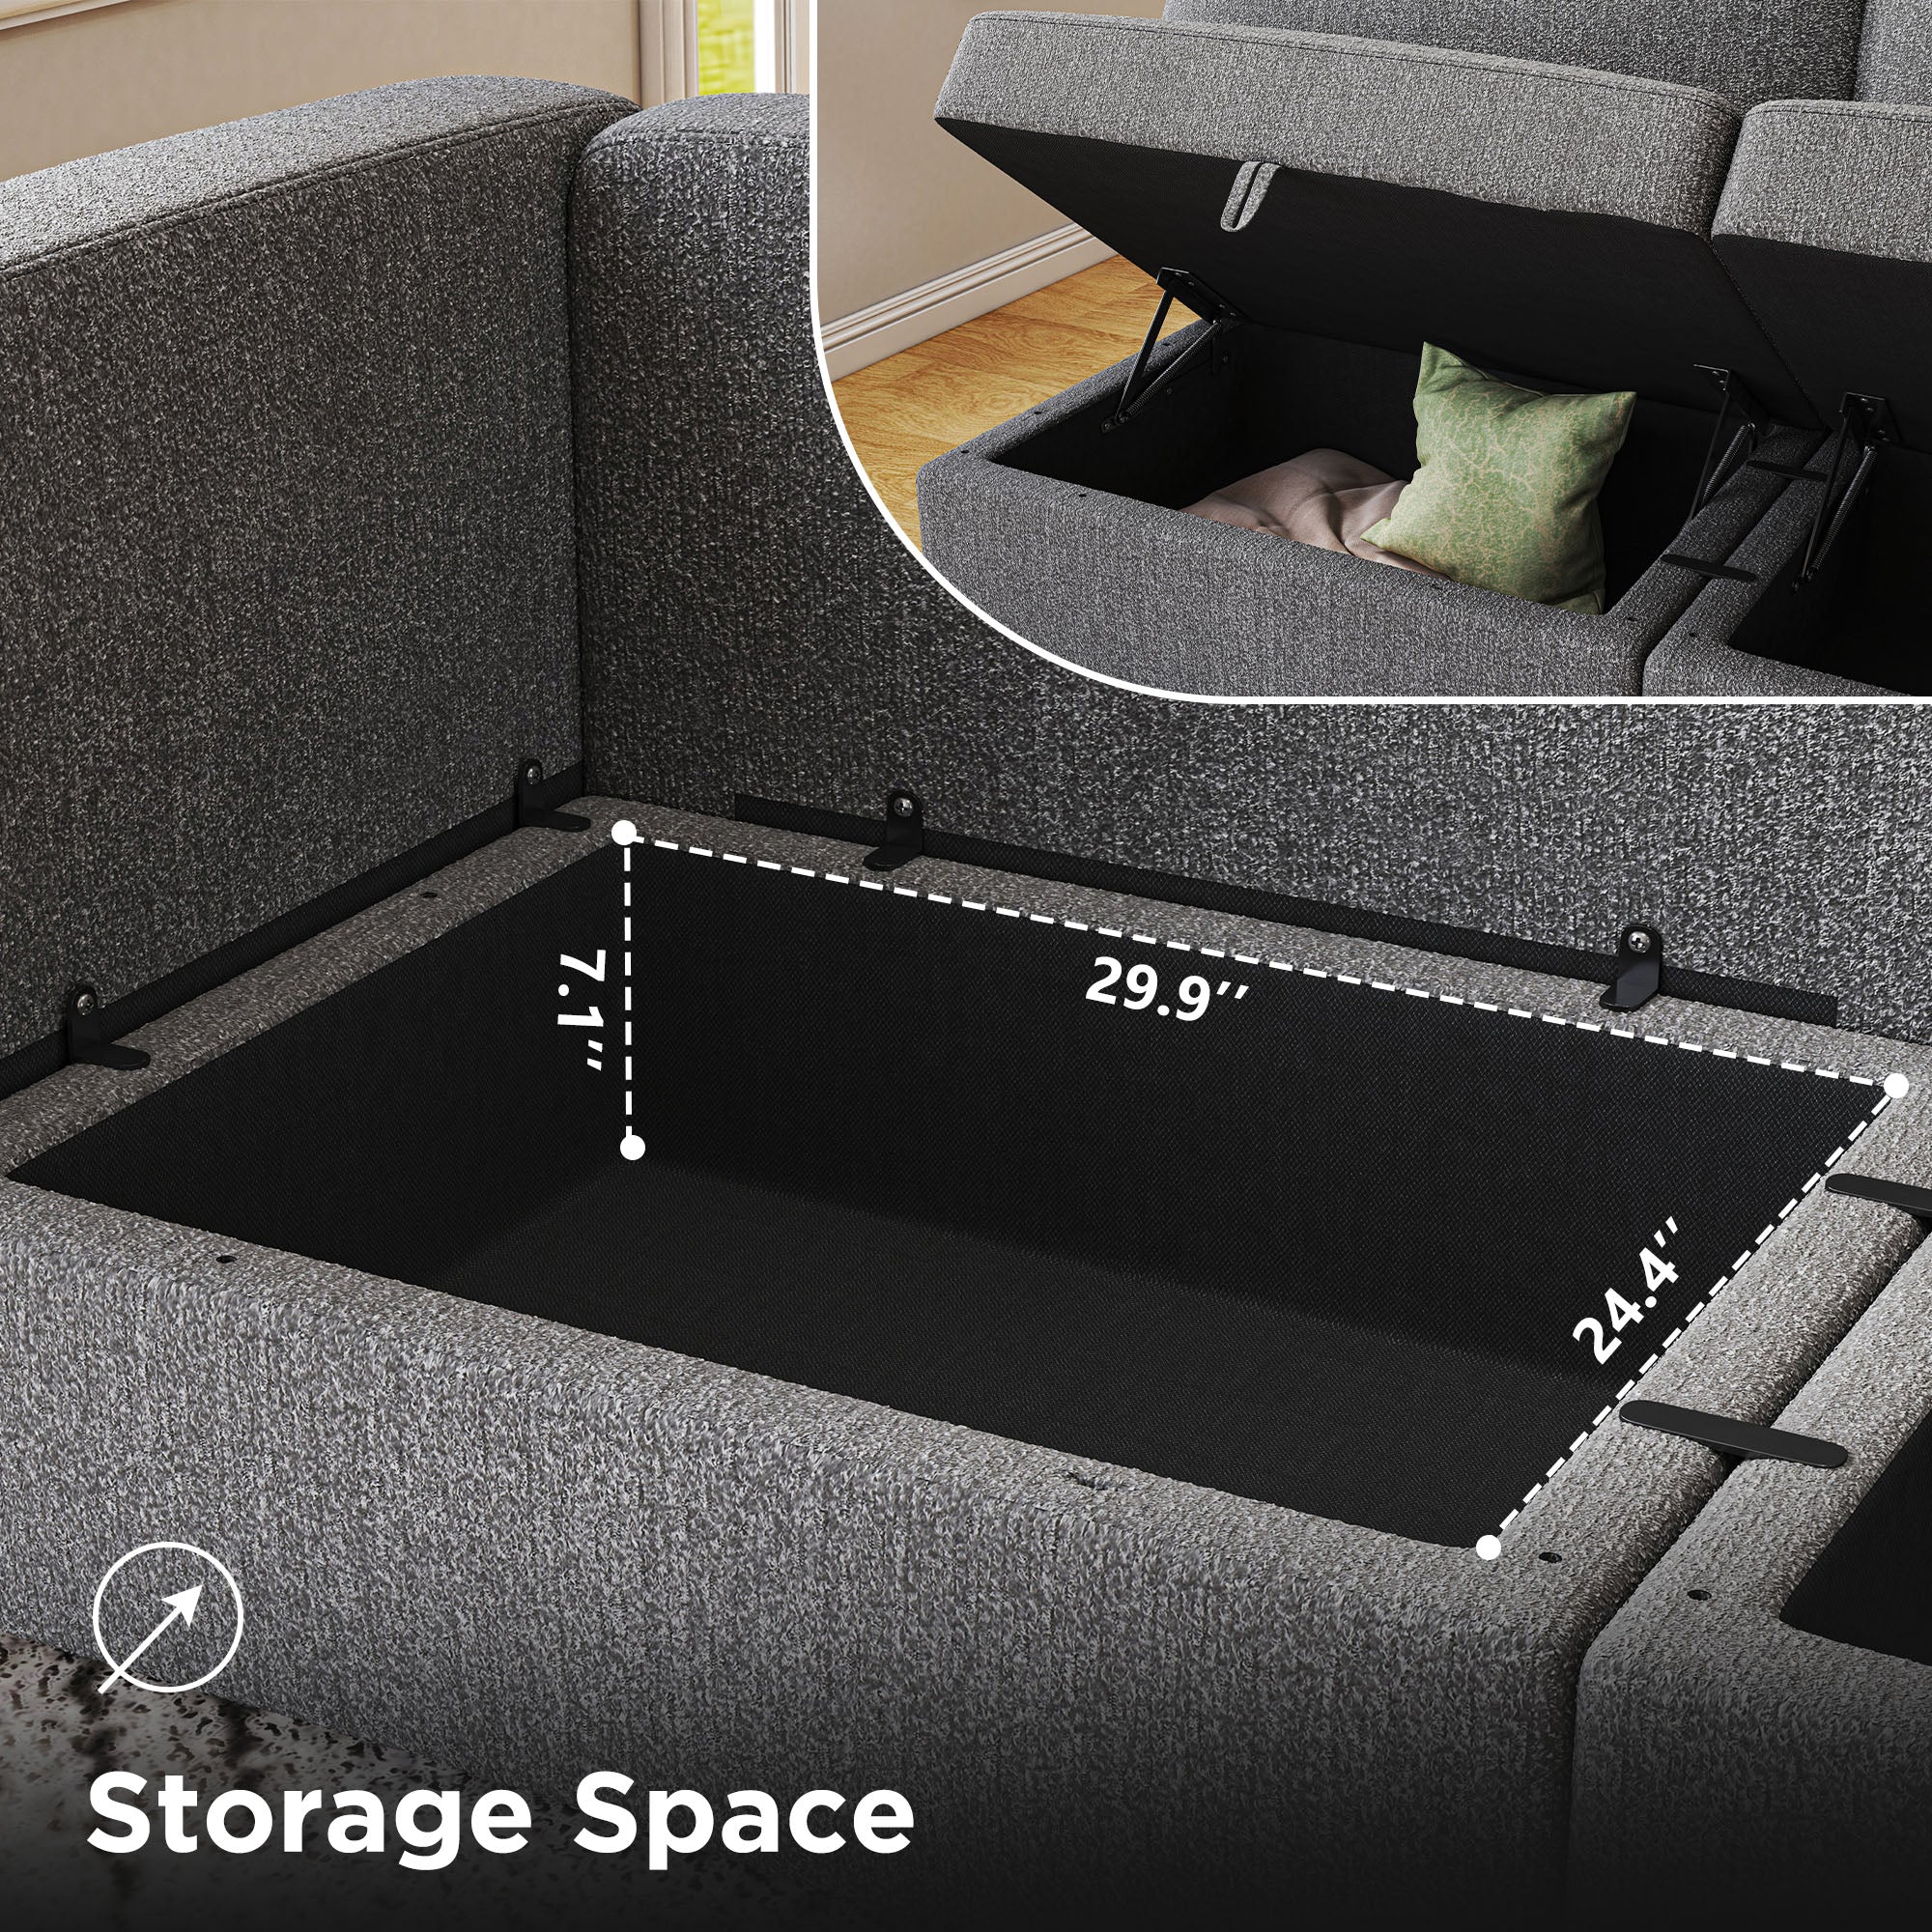 Hidden Storage Space of HONBAY Fabric Modular Sofa Couch